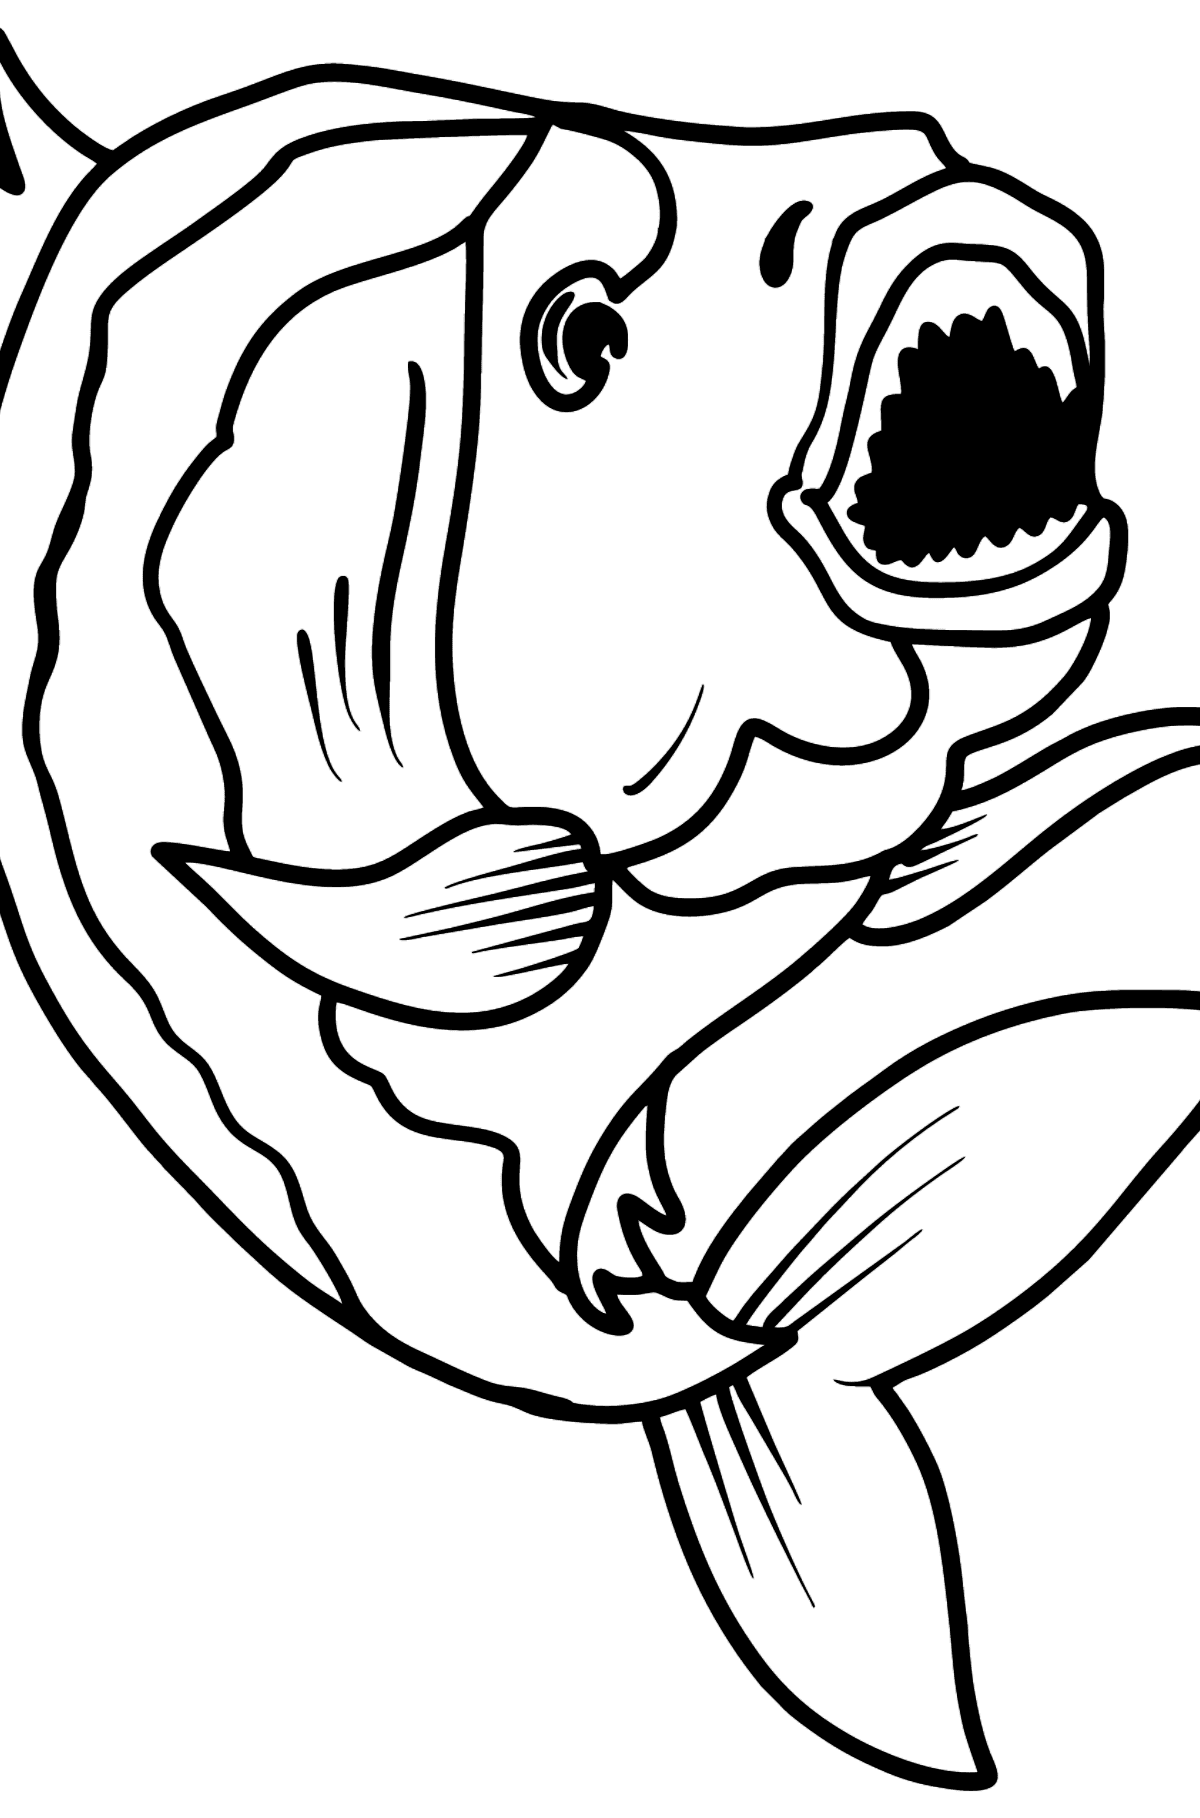 Piranha coloring page - Coloring Pages for Kids